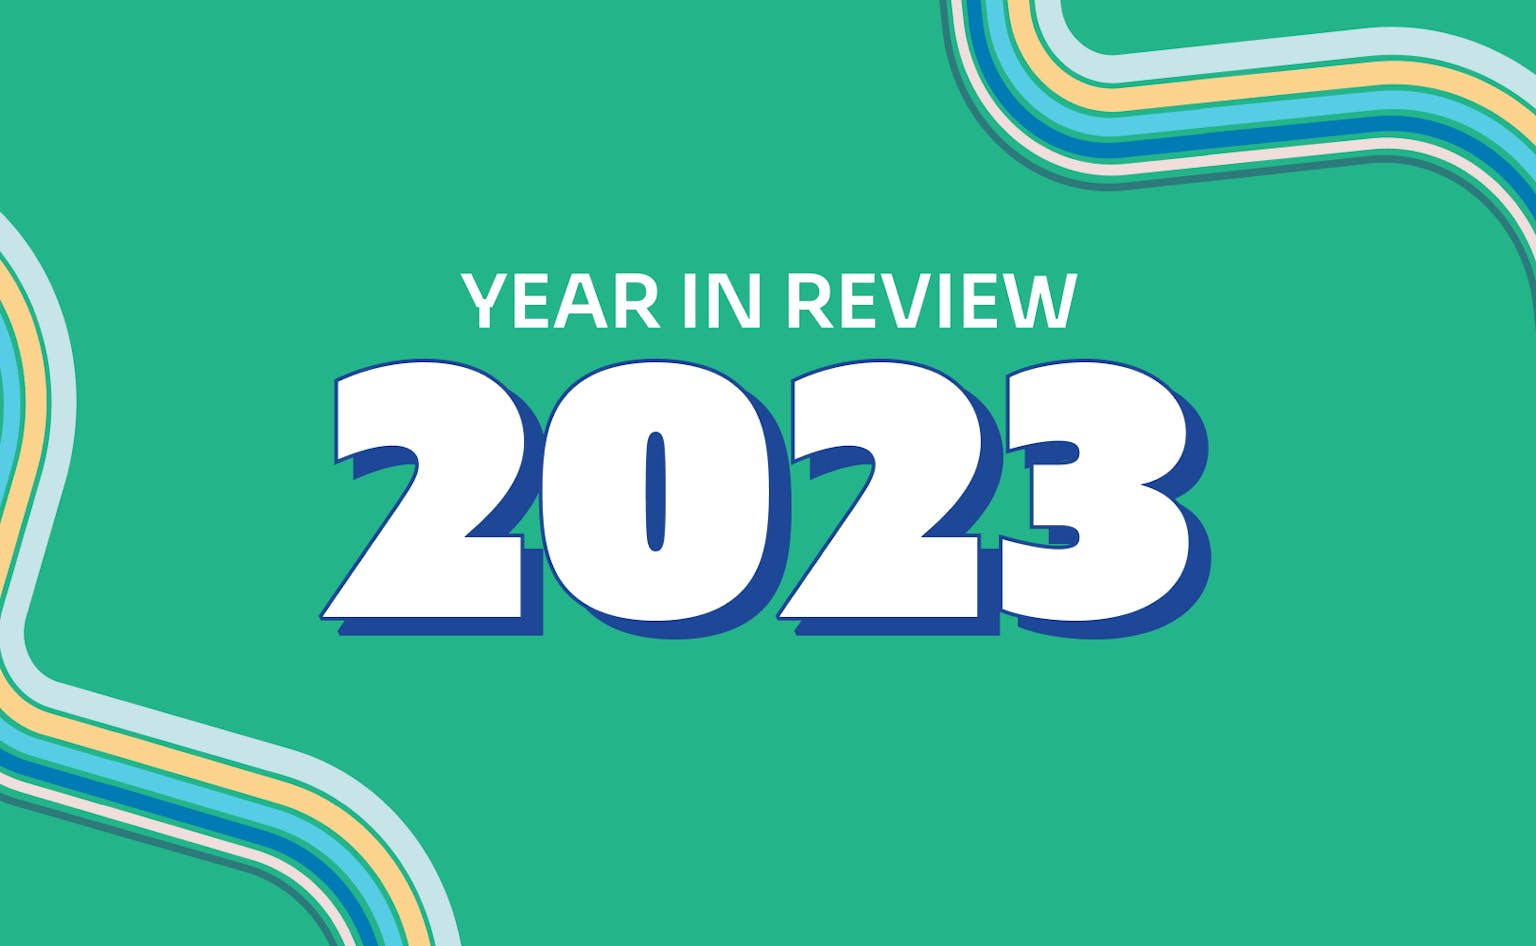 2023 Year in Review 